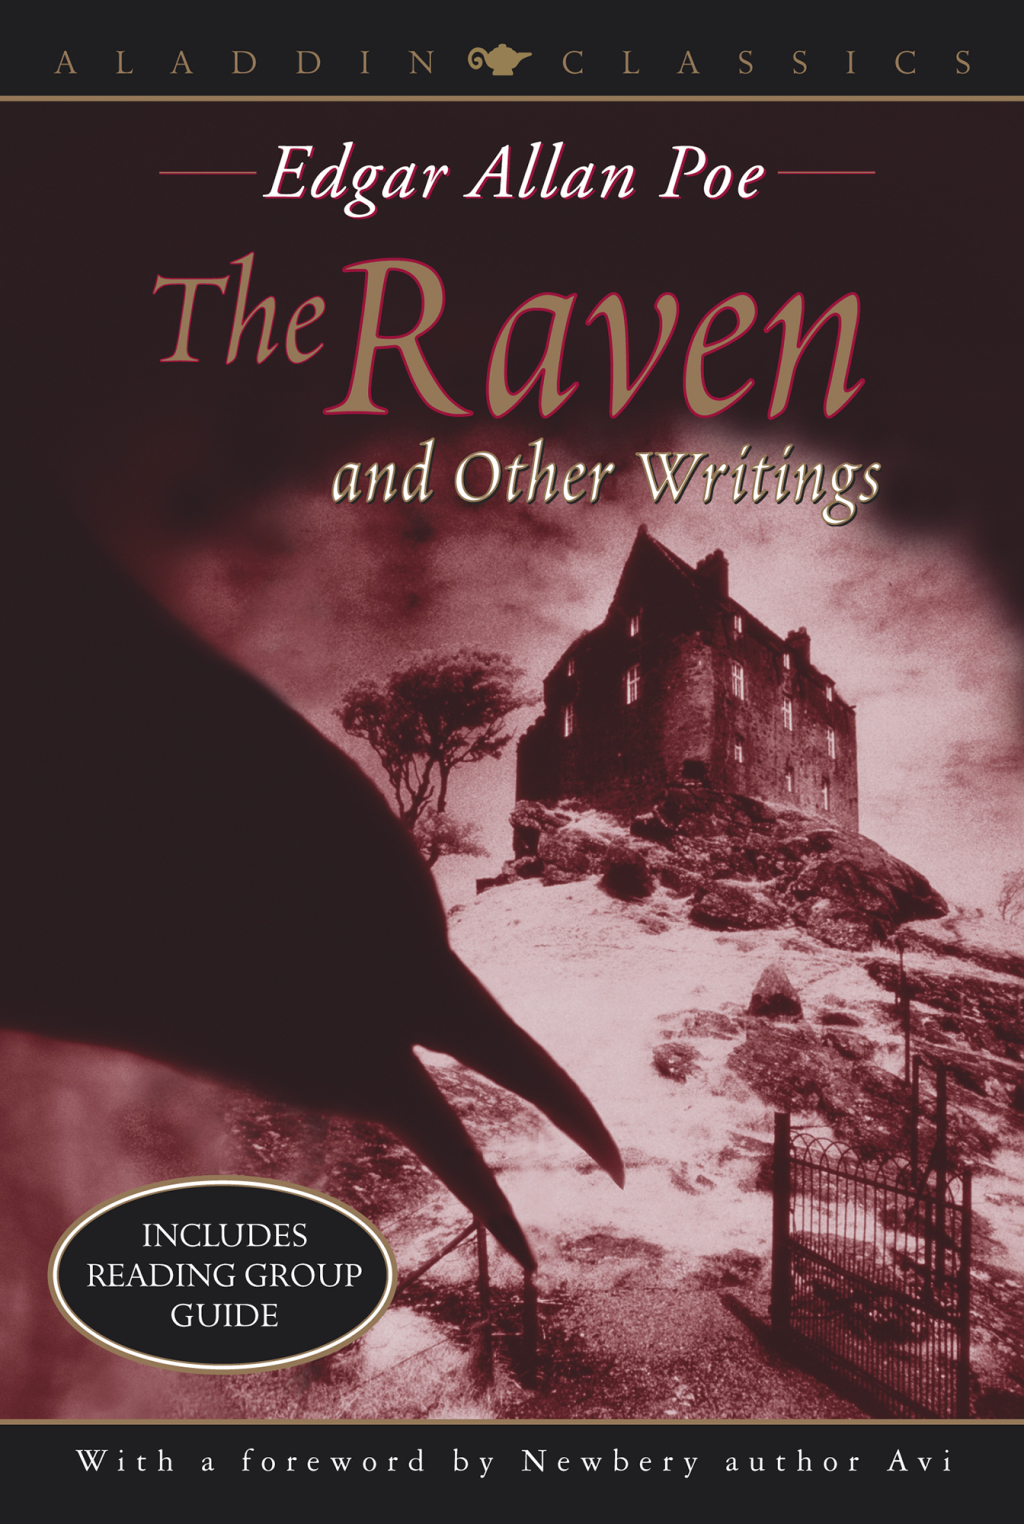 The Raven and Other Writings (eBook) - Edgar Allan Poe,